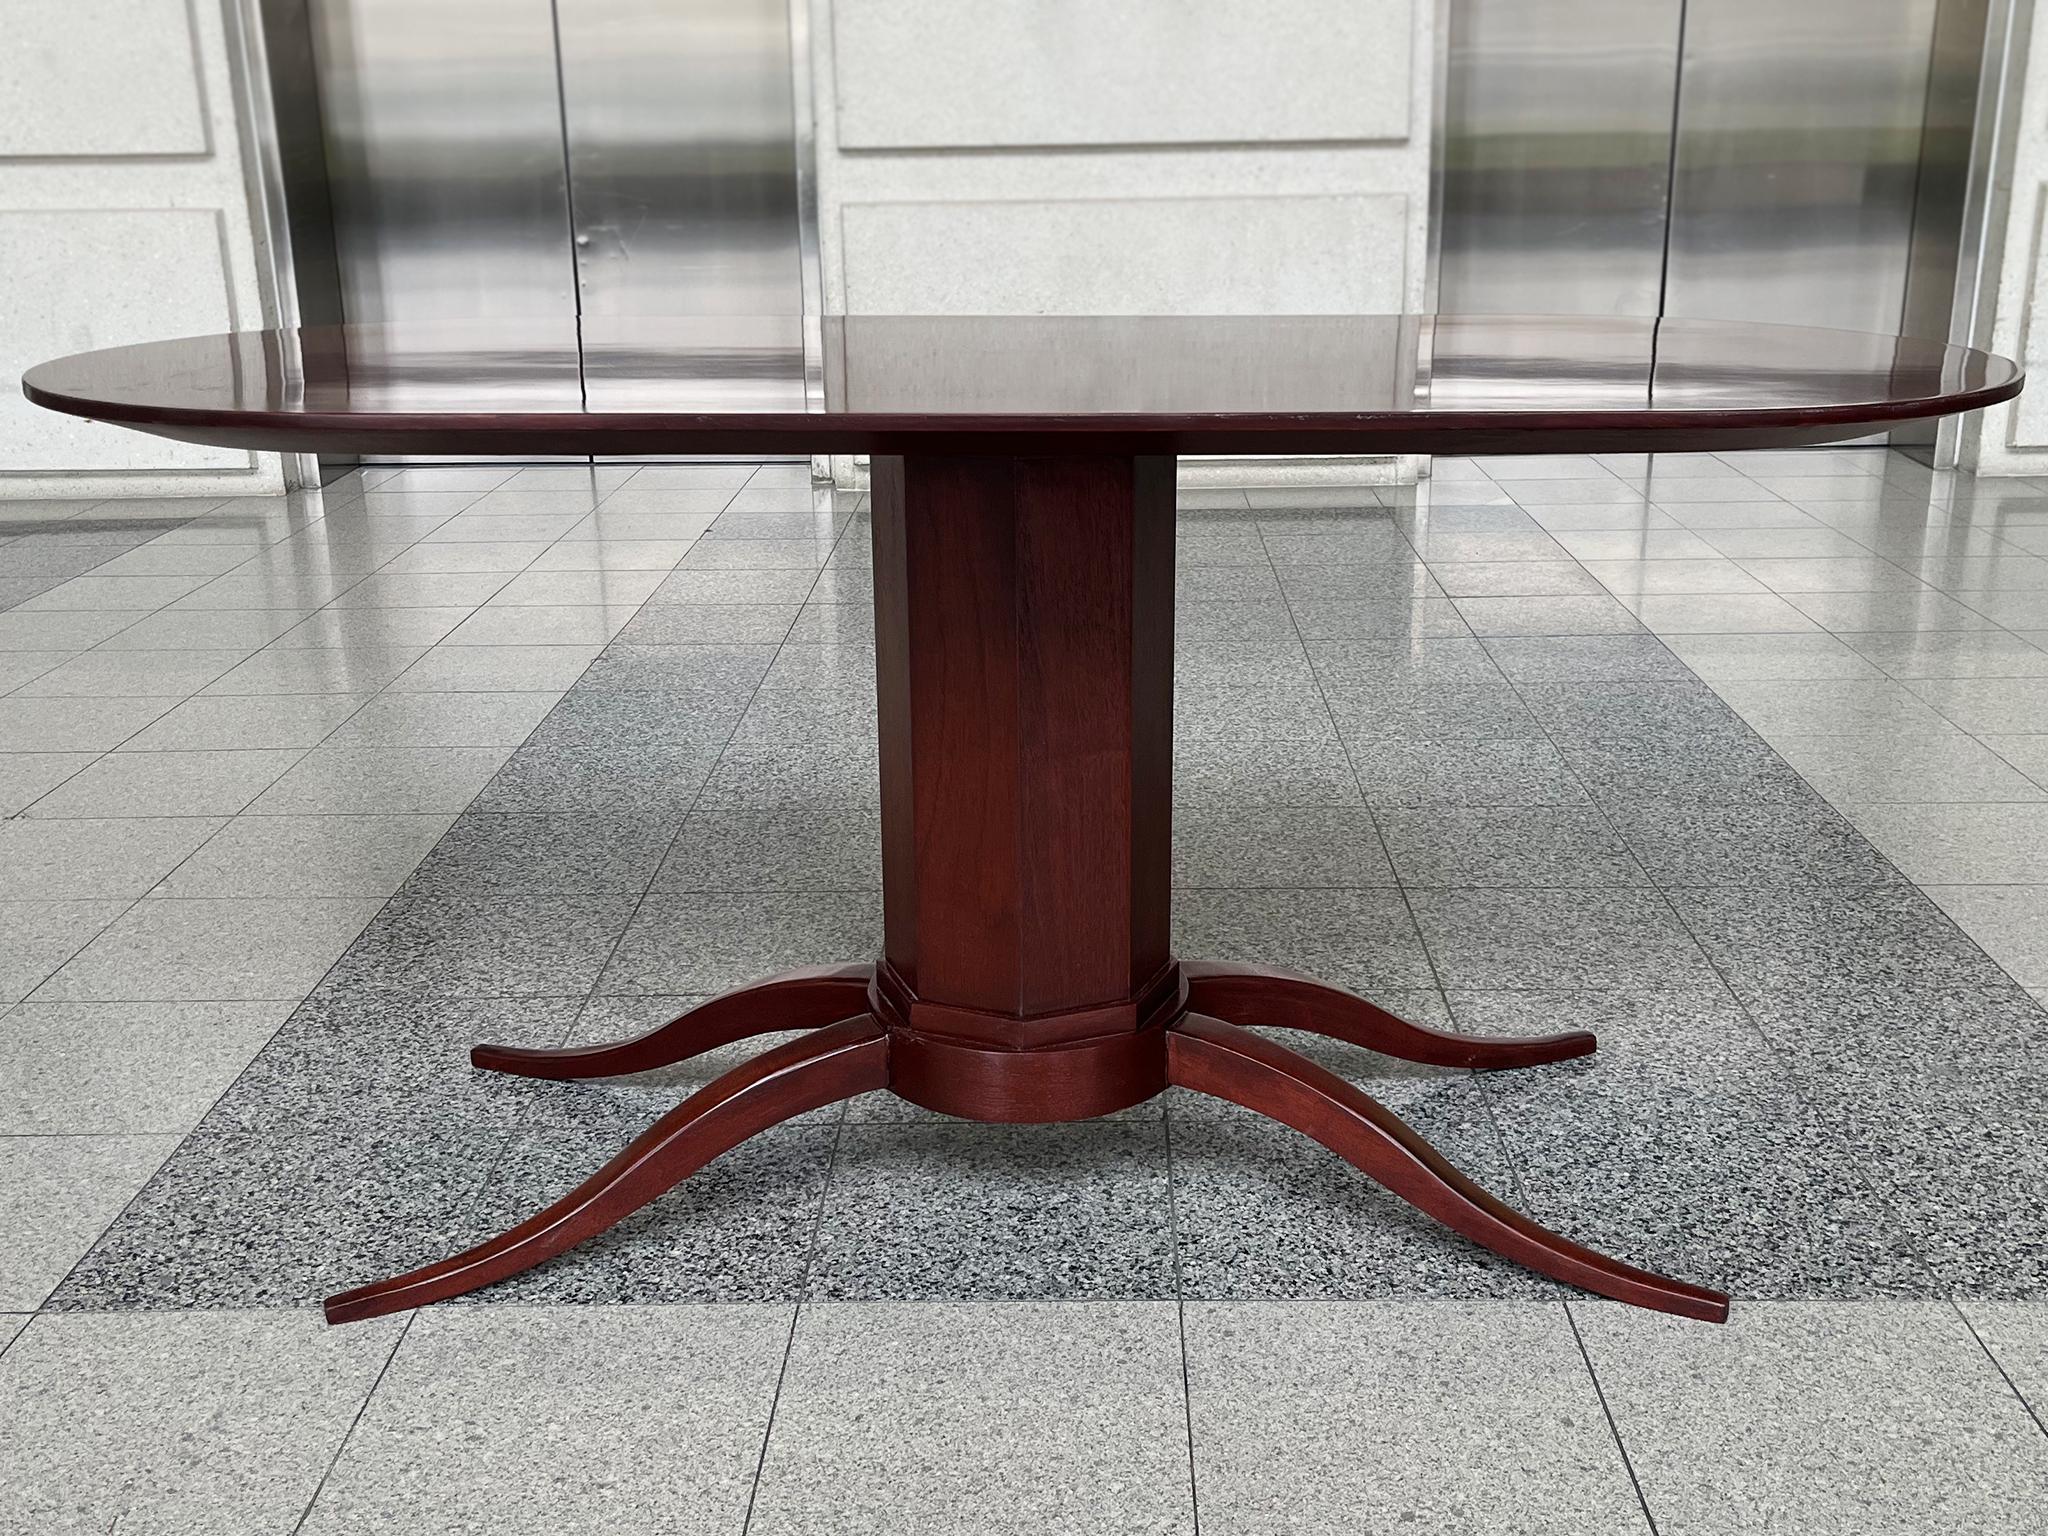 This Art Deco racetrack table was crafted in the 1920s. It is mahogany and newly refinished, with a rich, warm red-brown tone. The pedestal base culminates in 4 elegant sprawled feet.

Dimensions:
60 in. width
27 in. depth
28.5 in.